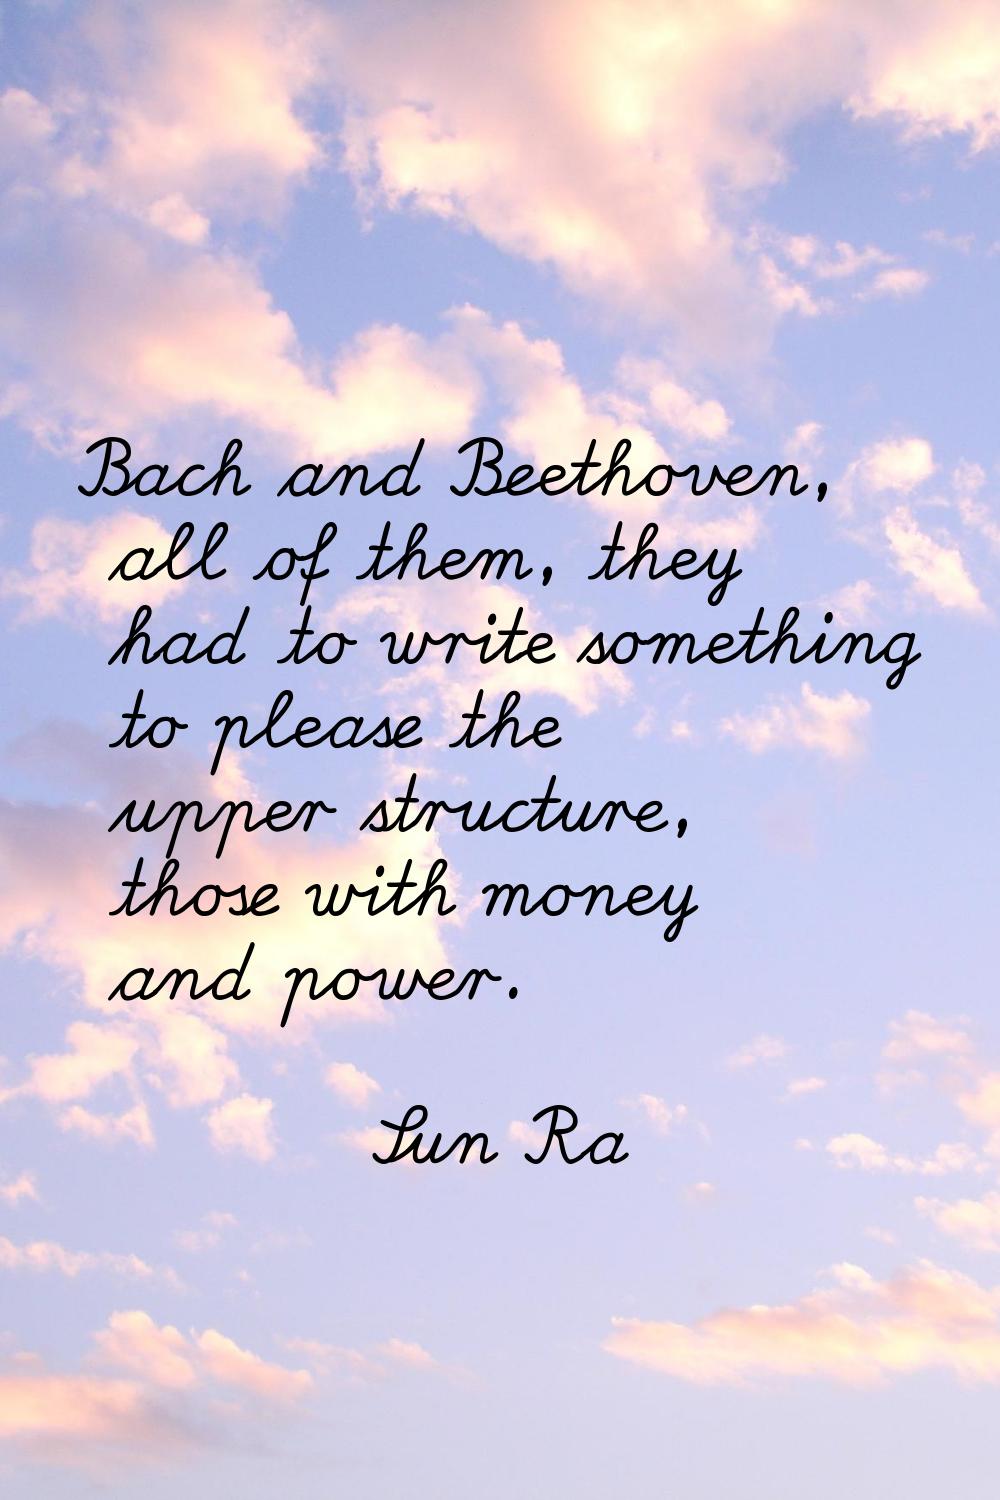 Bach and Beethoven, all of them, they had to write something to please the upper structure, those w